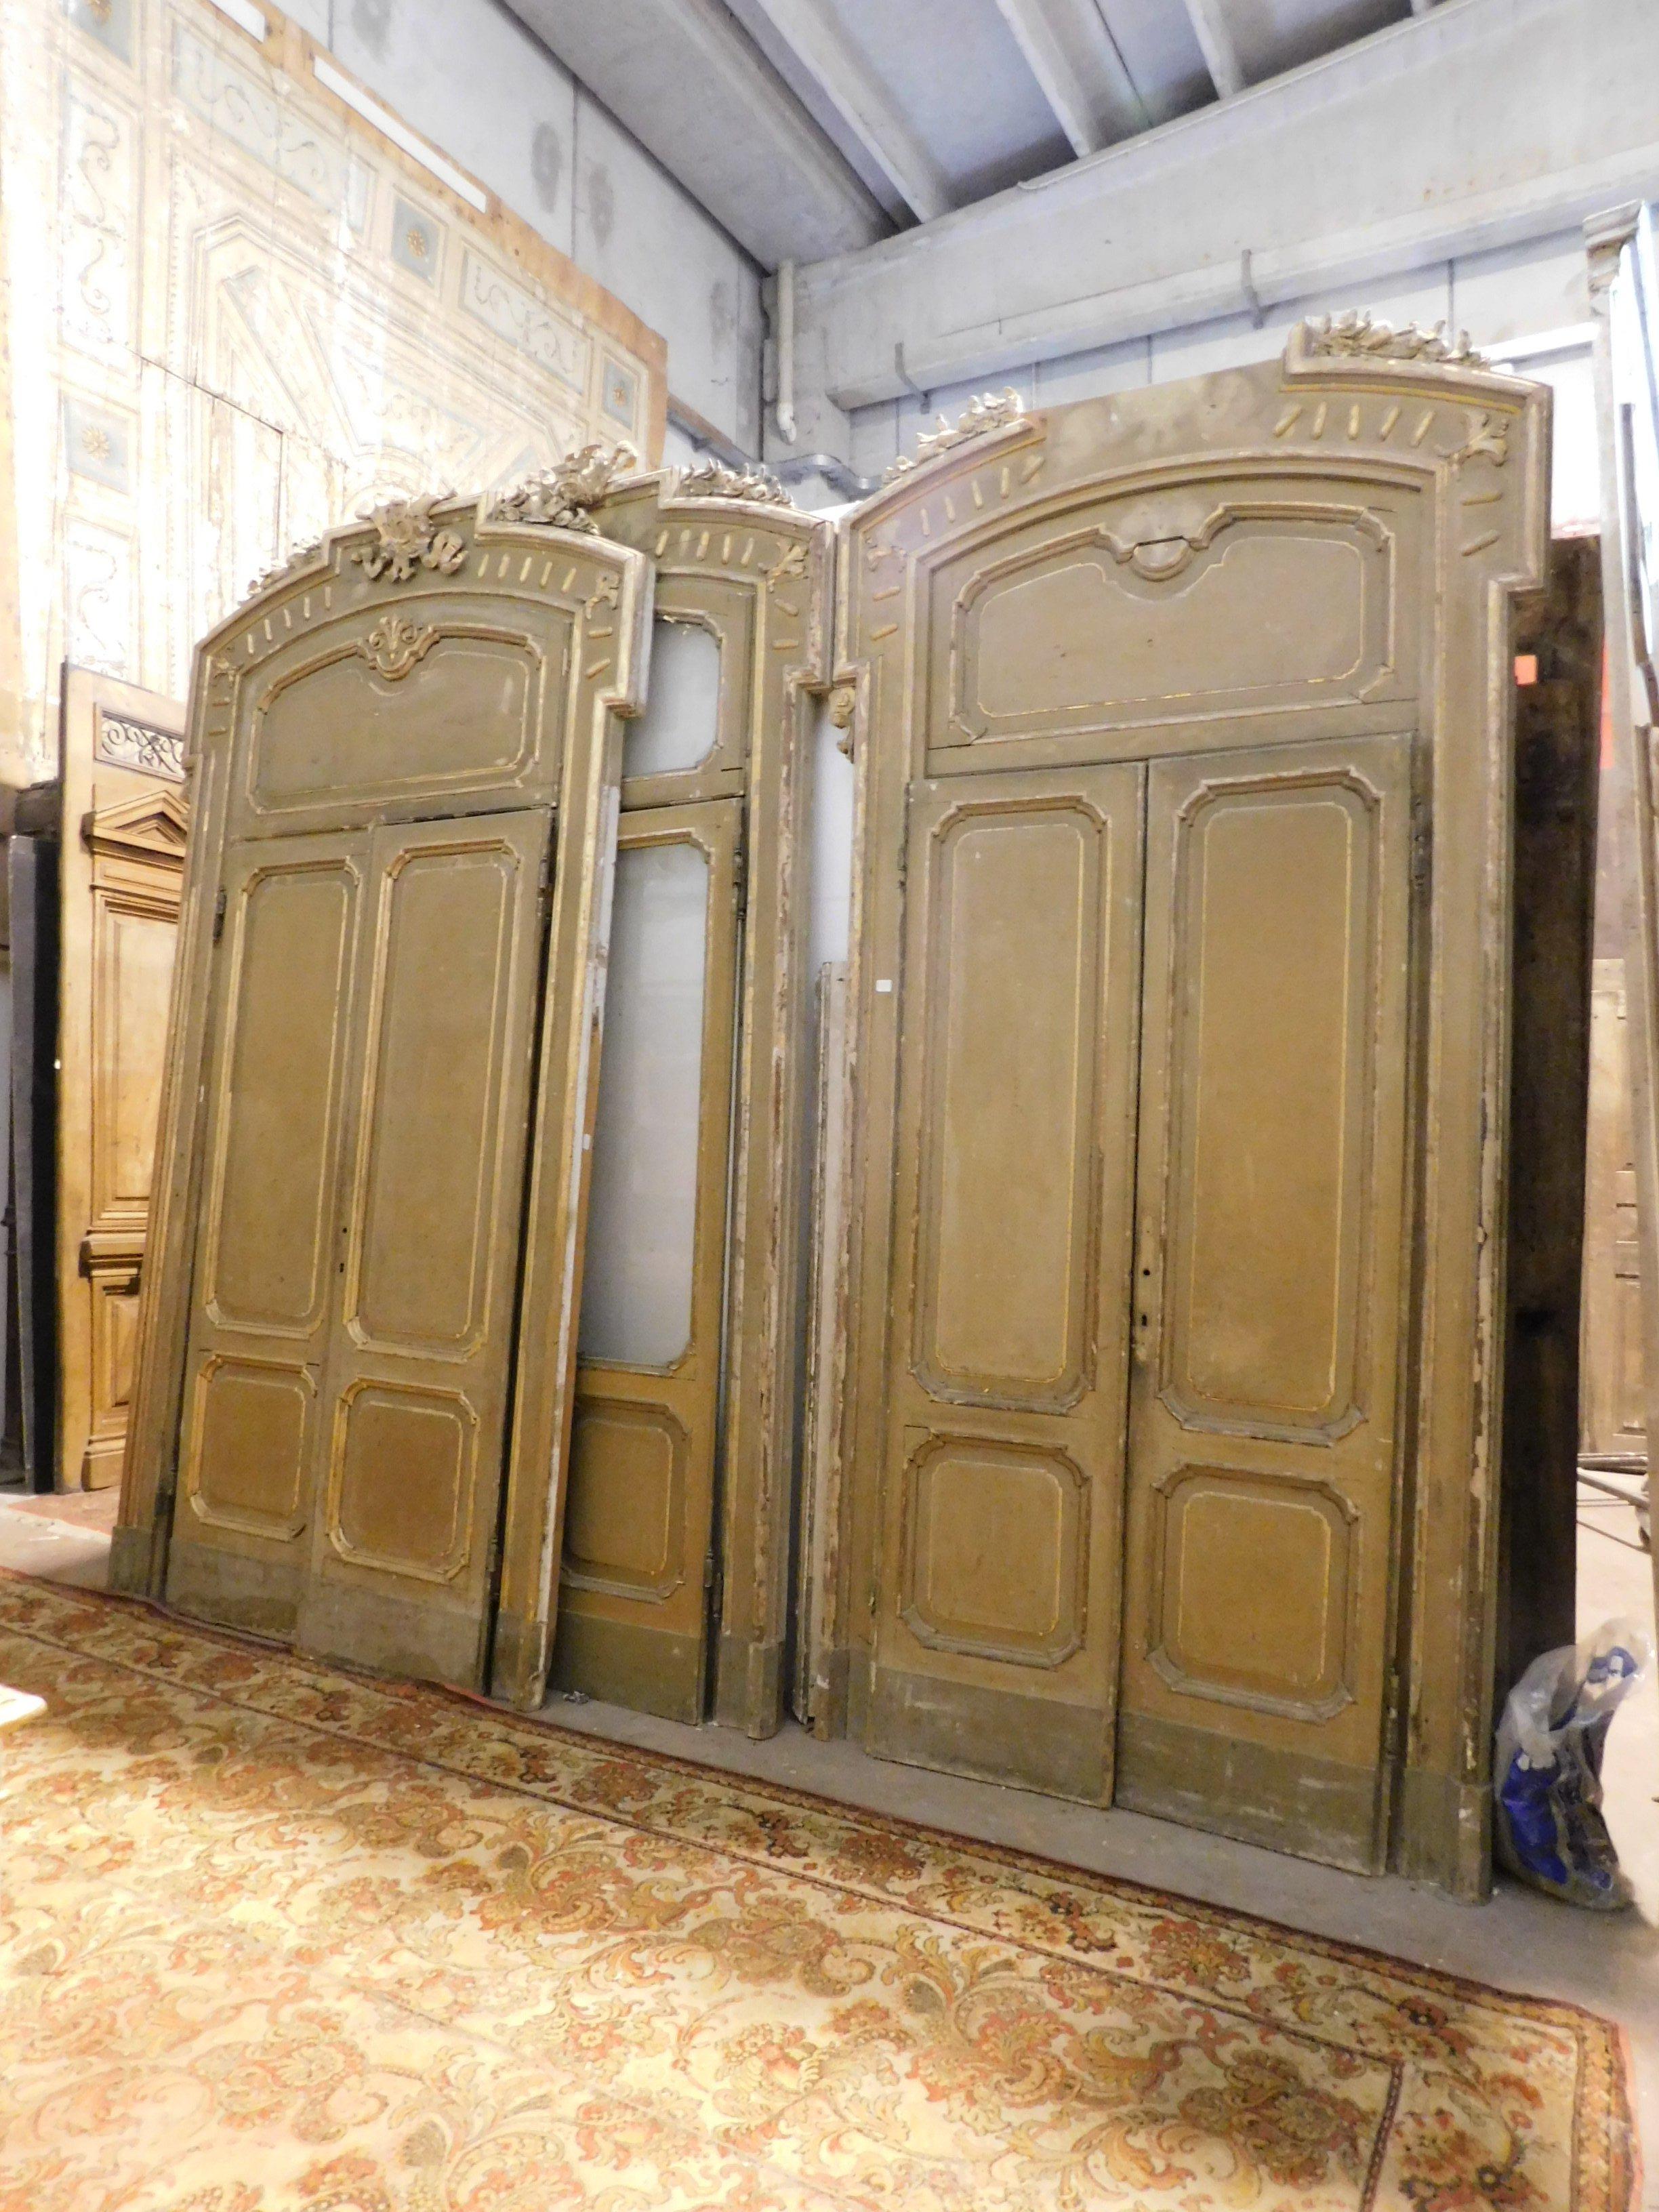 Ancient sets of n. 4 gilded lacquered doors, composed of two glass doors and two doors with paneling, beautiful and elegant, with charm of the old Milan Italian.
They come from an aristocratic villa from the 1800s, with an original frame and